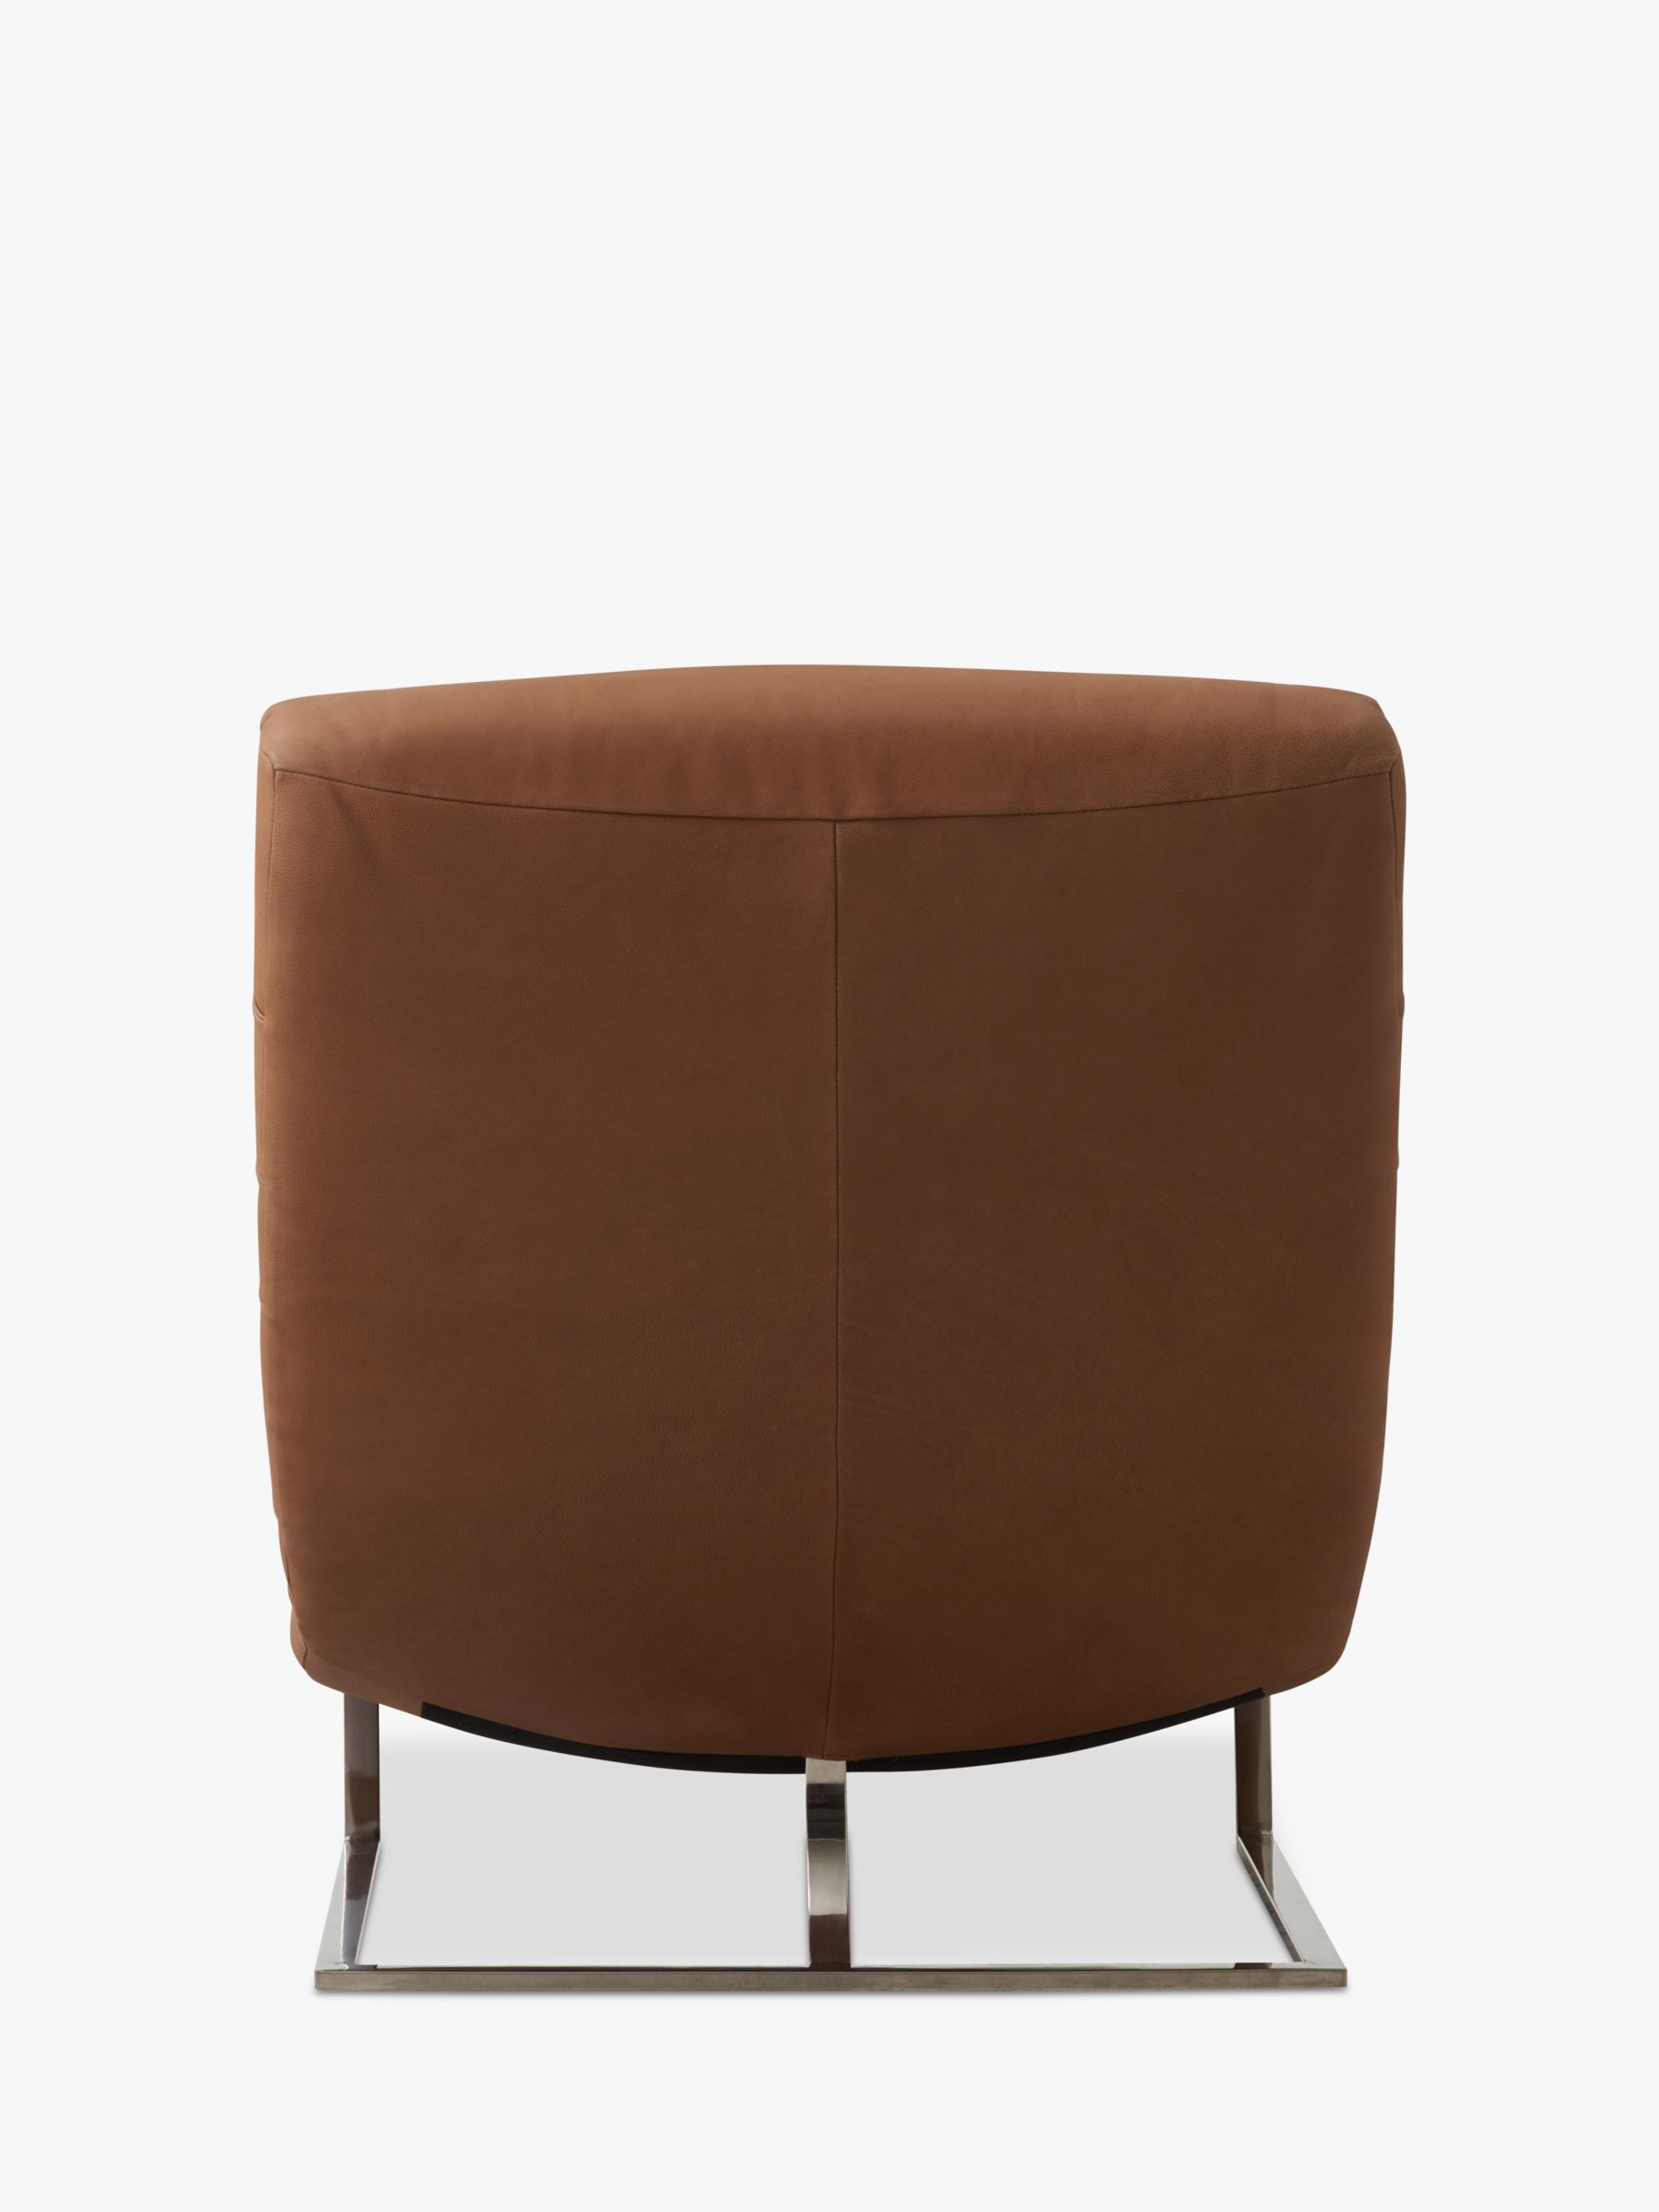 Halo Fold Leather Chair, Dark Leg, Hand Tipped Camel